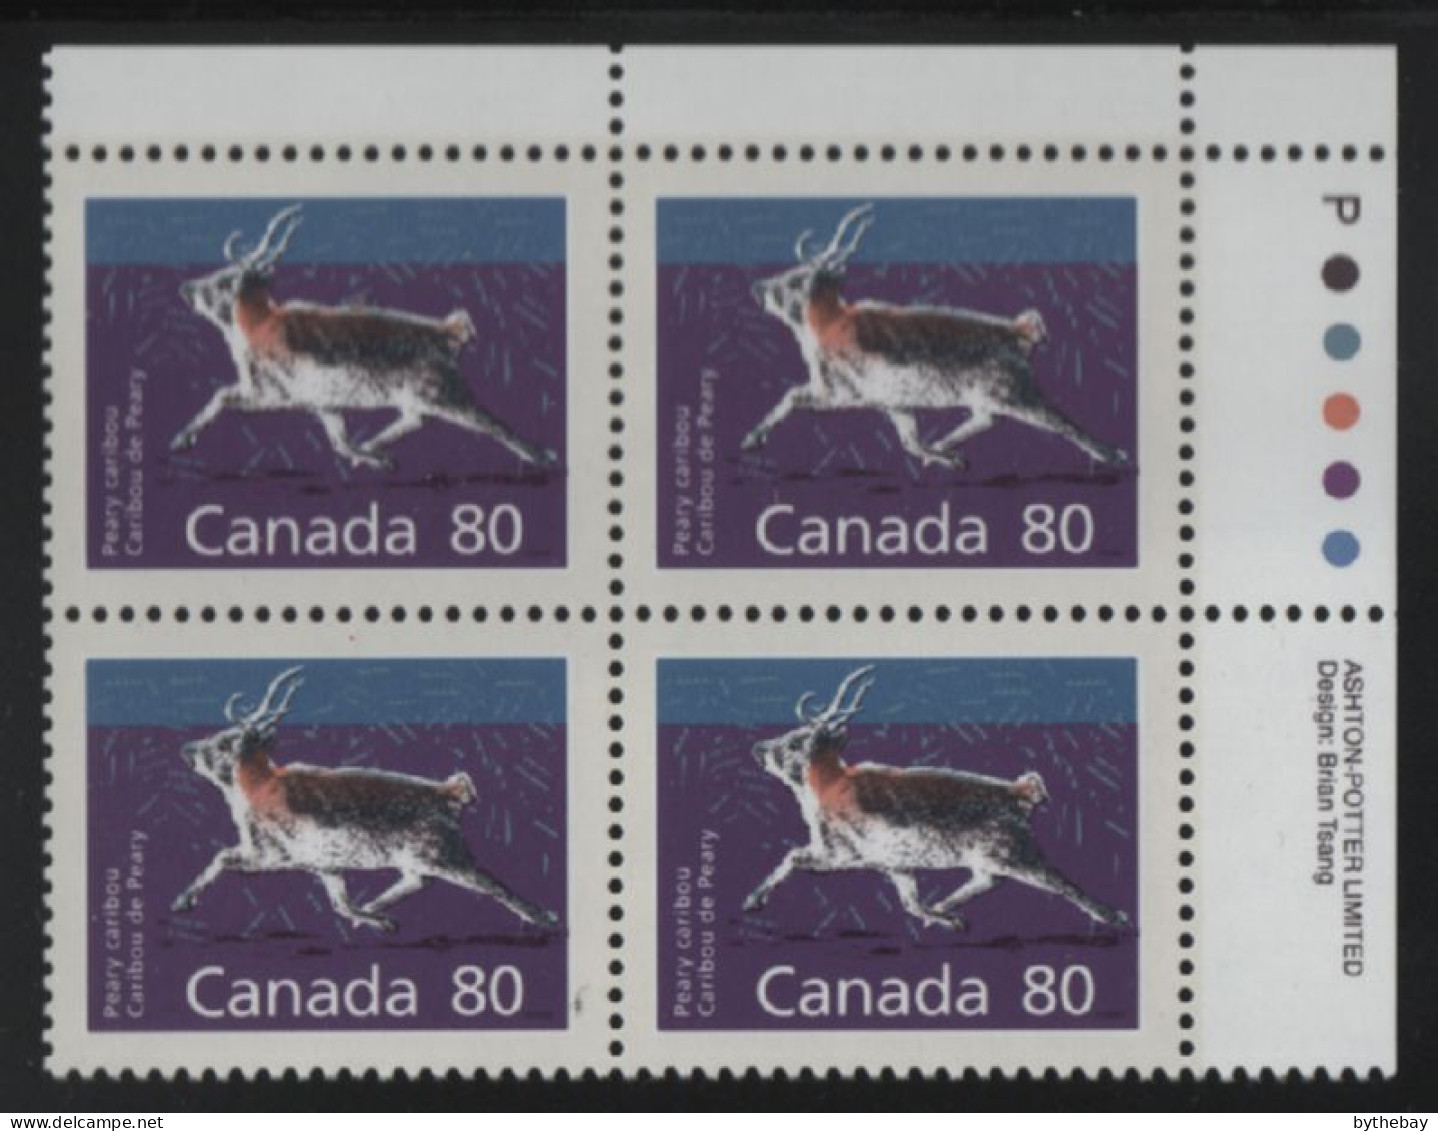 Canada 1988-92 MNH Sc 1180 Peary Caribou UR Plate Block - Plate Number & Inscriptions